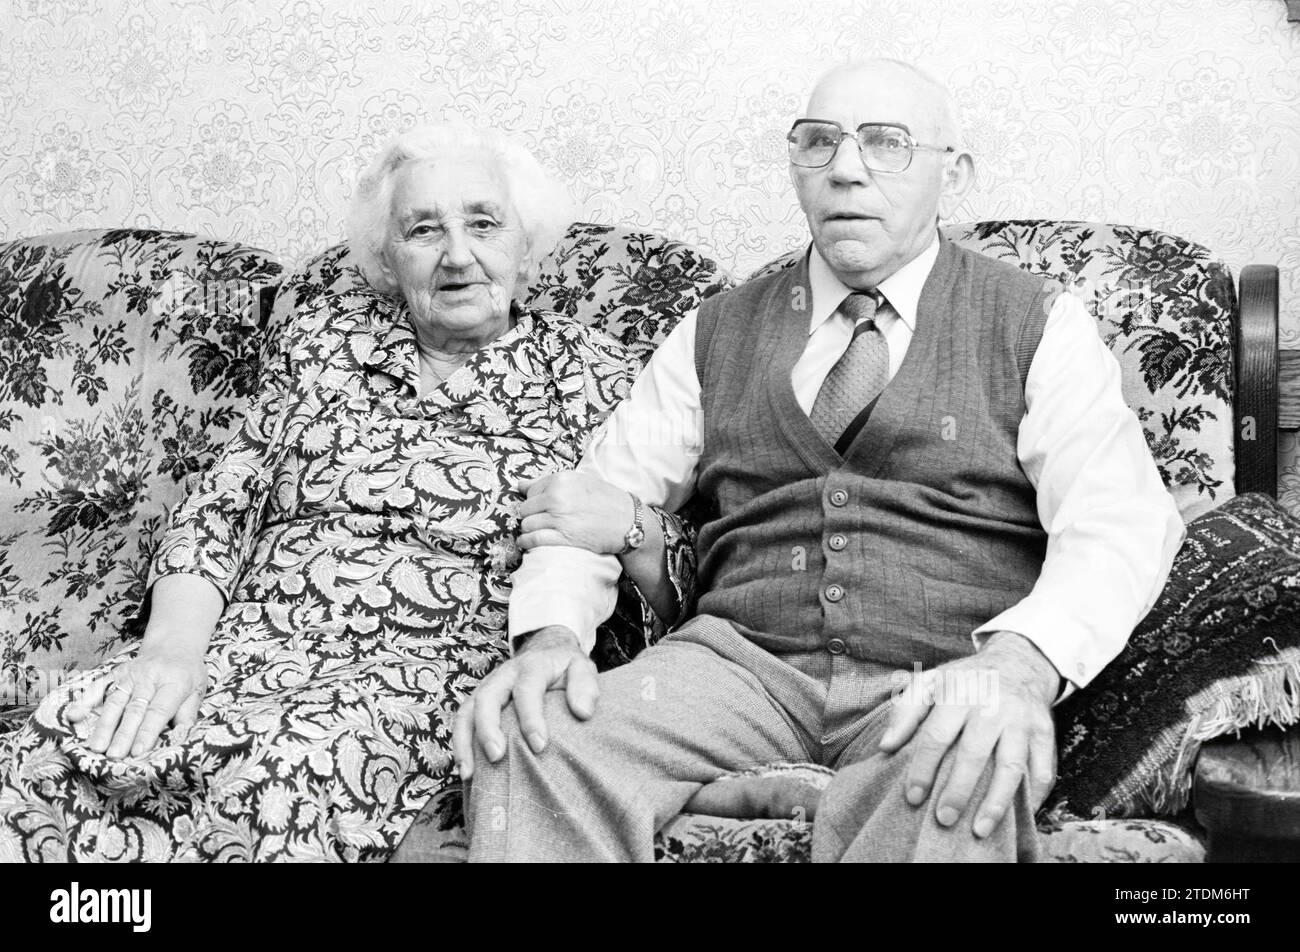 60 year old couple Sikkelerus, Beverwijk, Couples, Beverwijk, The Netherlands, 13-06-1983, Whizgle News from the Past, Tailored for the Future. Explore historical narratives, Dutch The Netherlands agency image with a modern perspective, bridging the gap between yesterday's events and tomorrow's insights. A timeless journey shaping the stories that shape our future Stock Photo